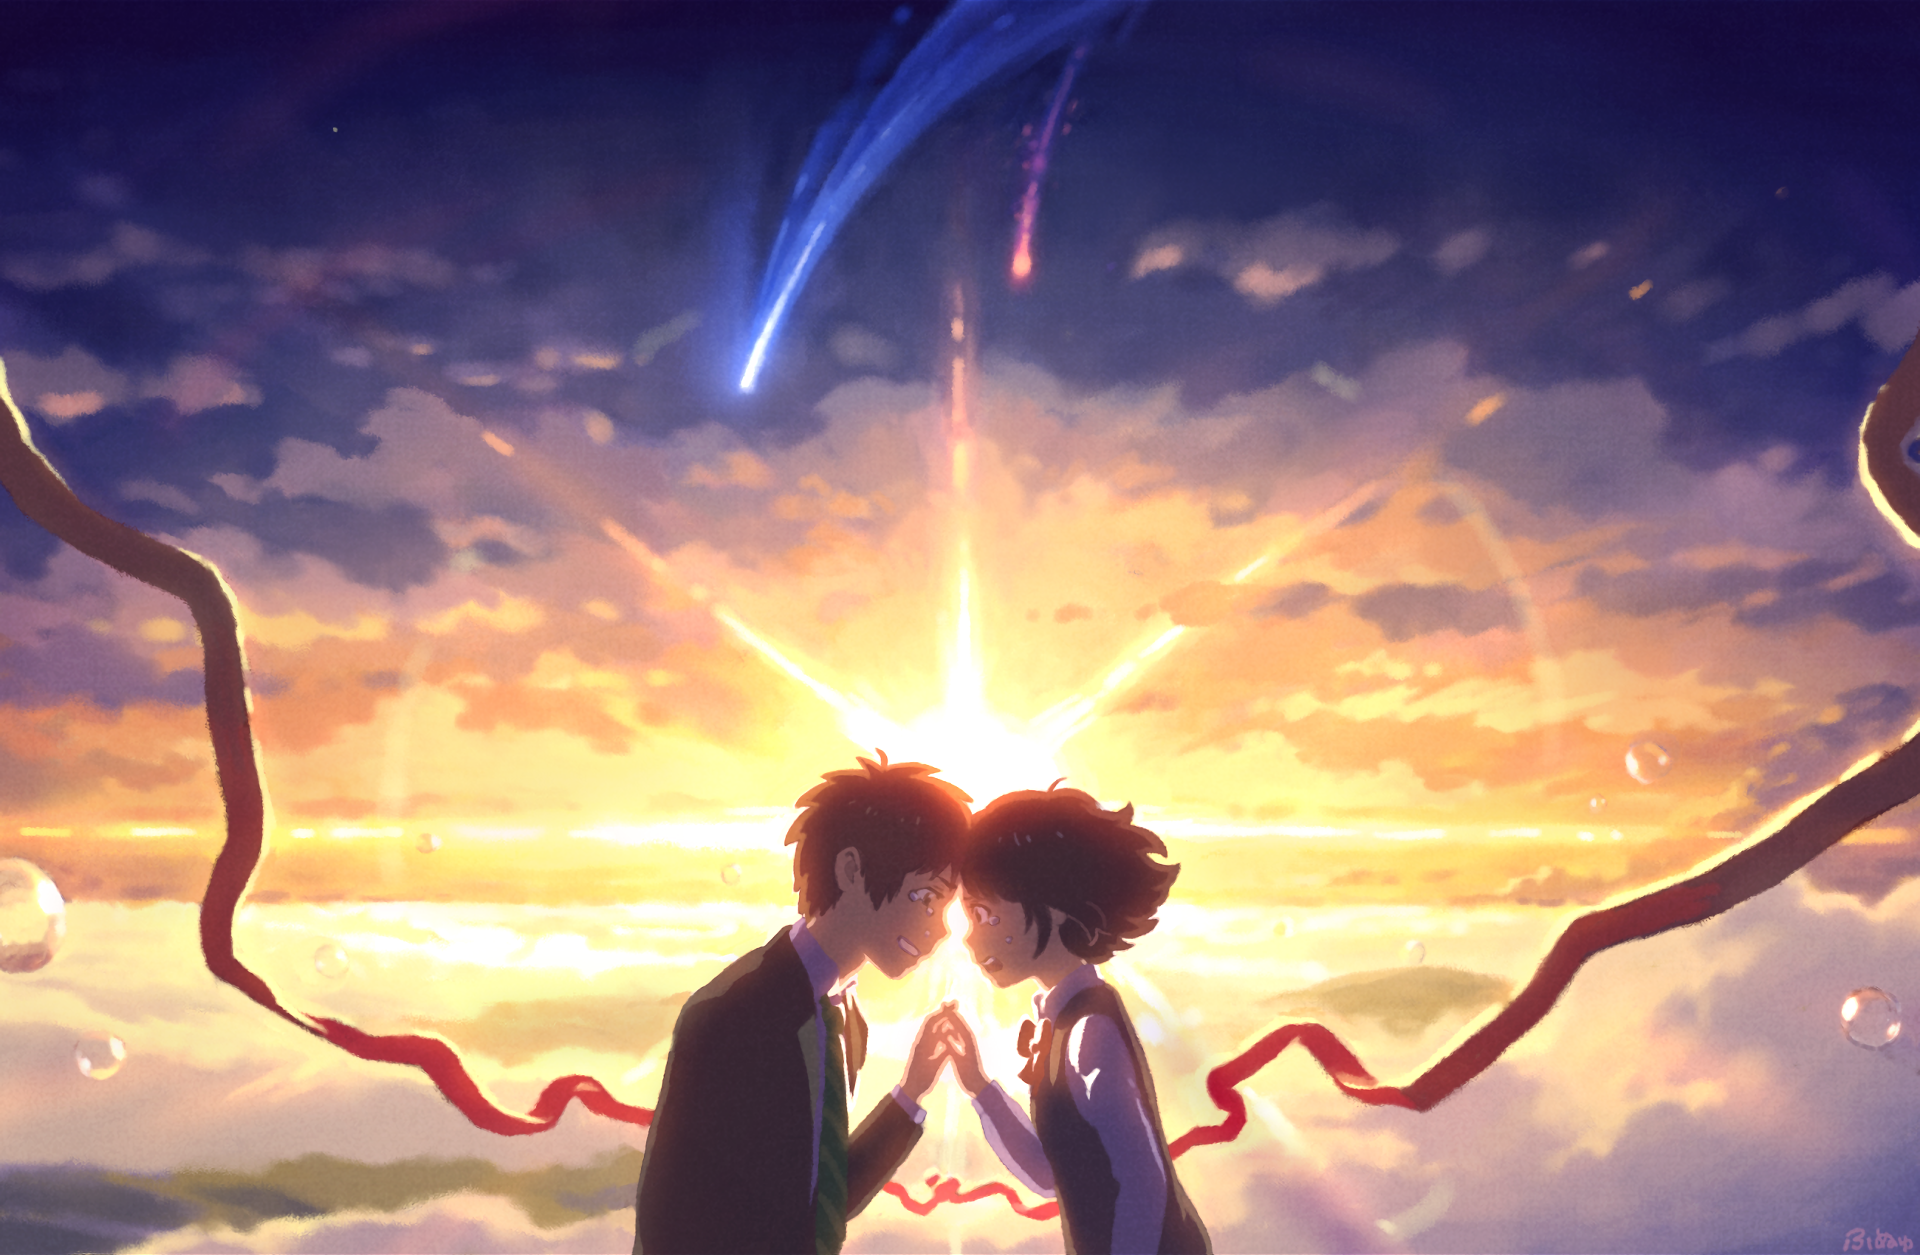  Your  Name  HD  Wallpaper  Background Image 1920x1255 